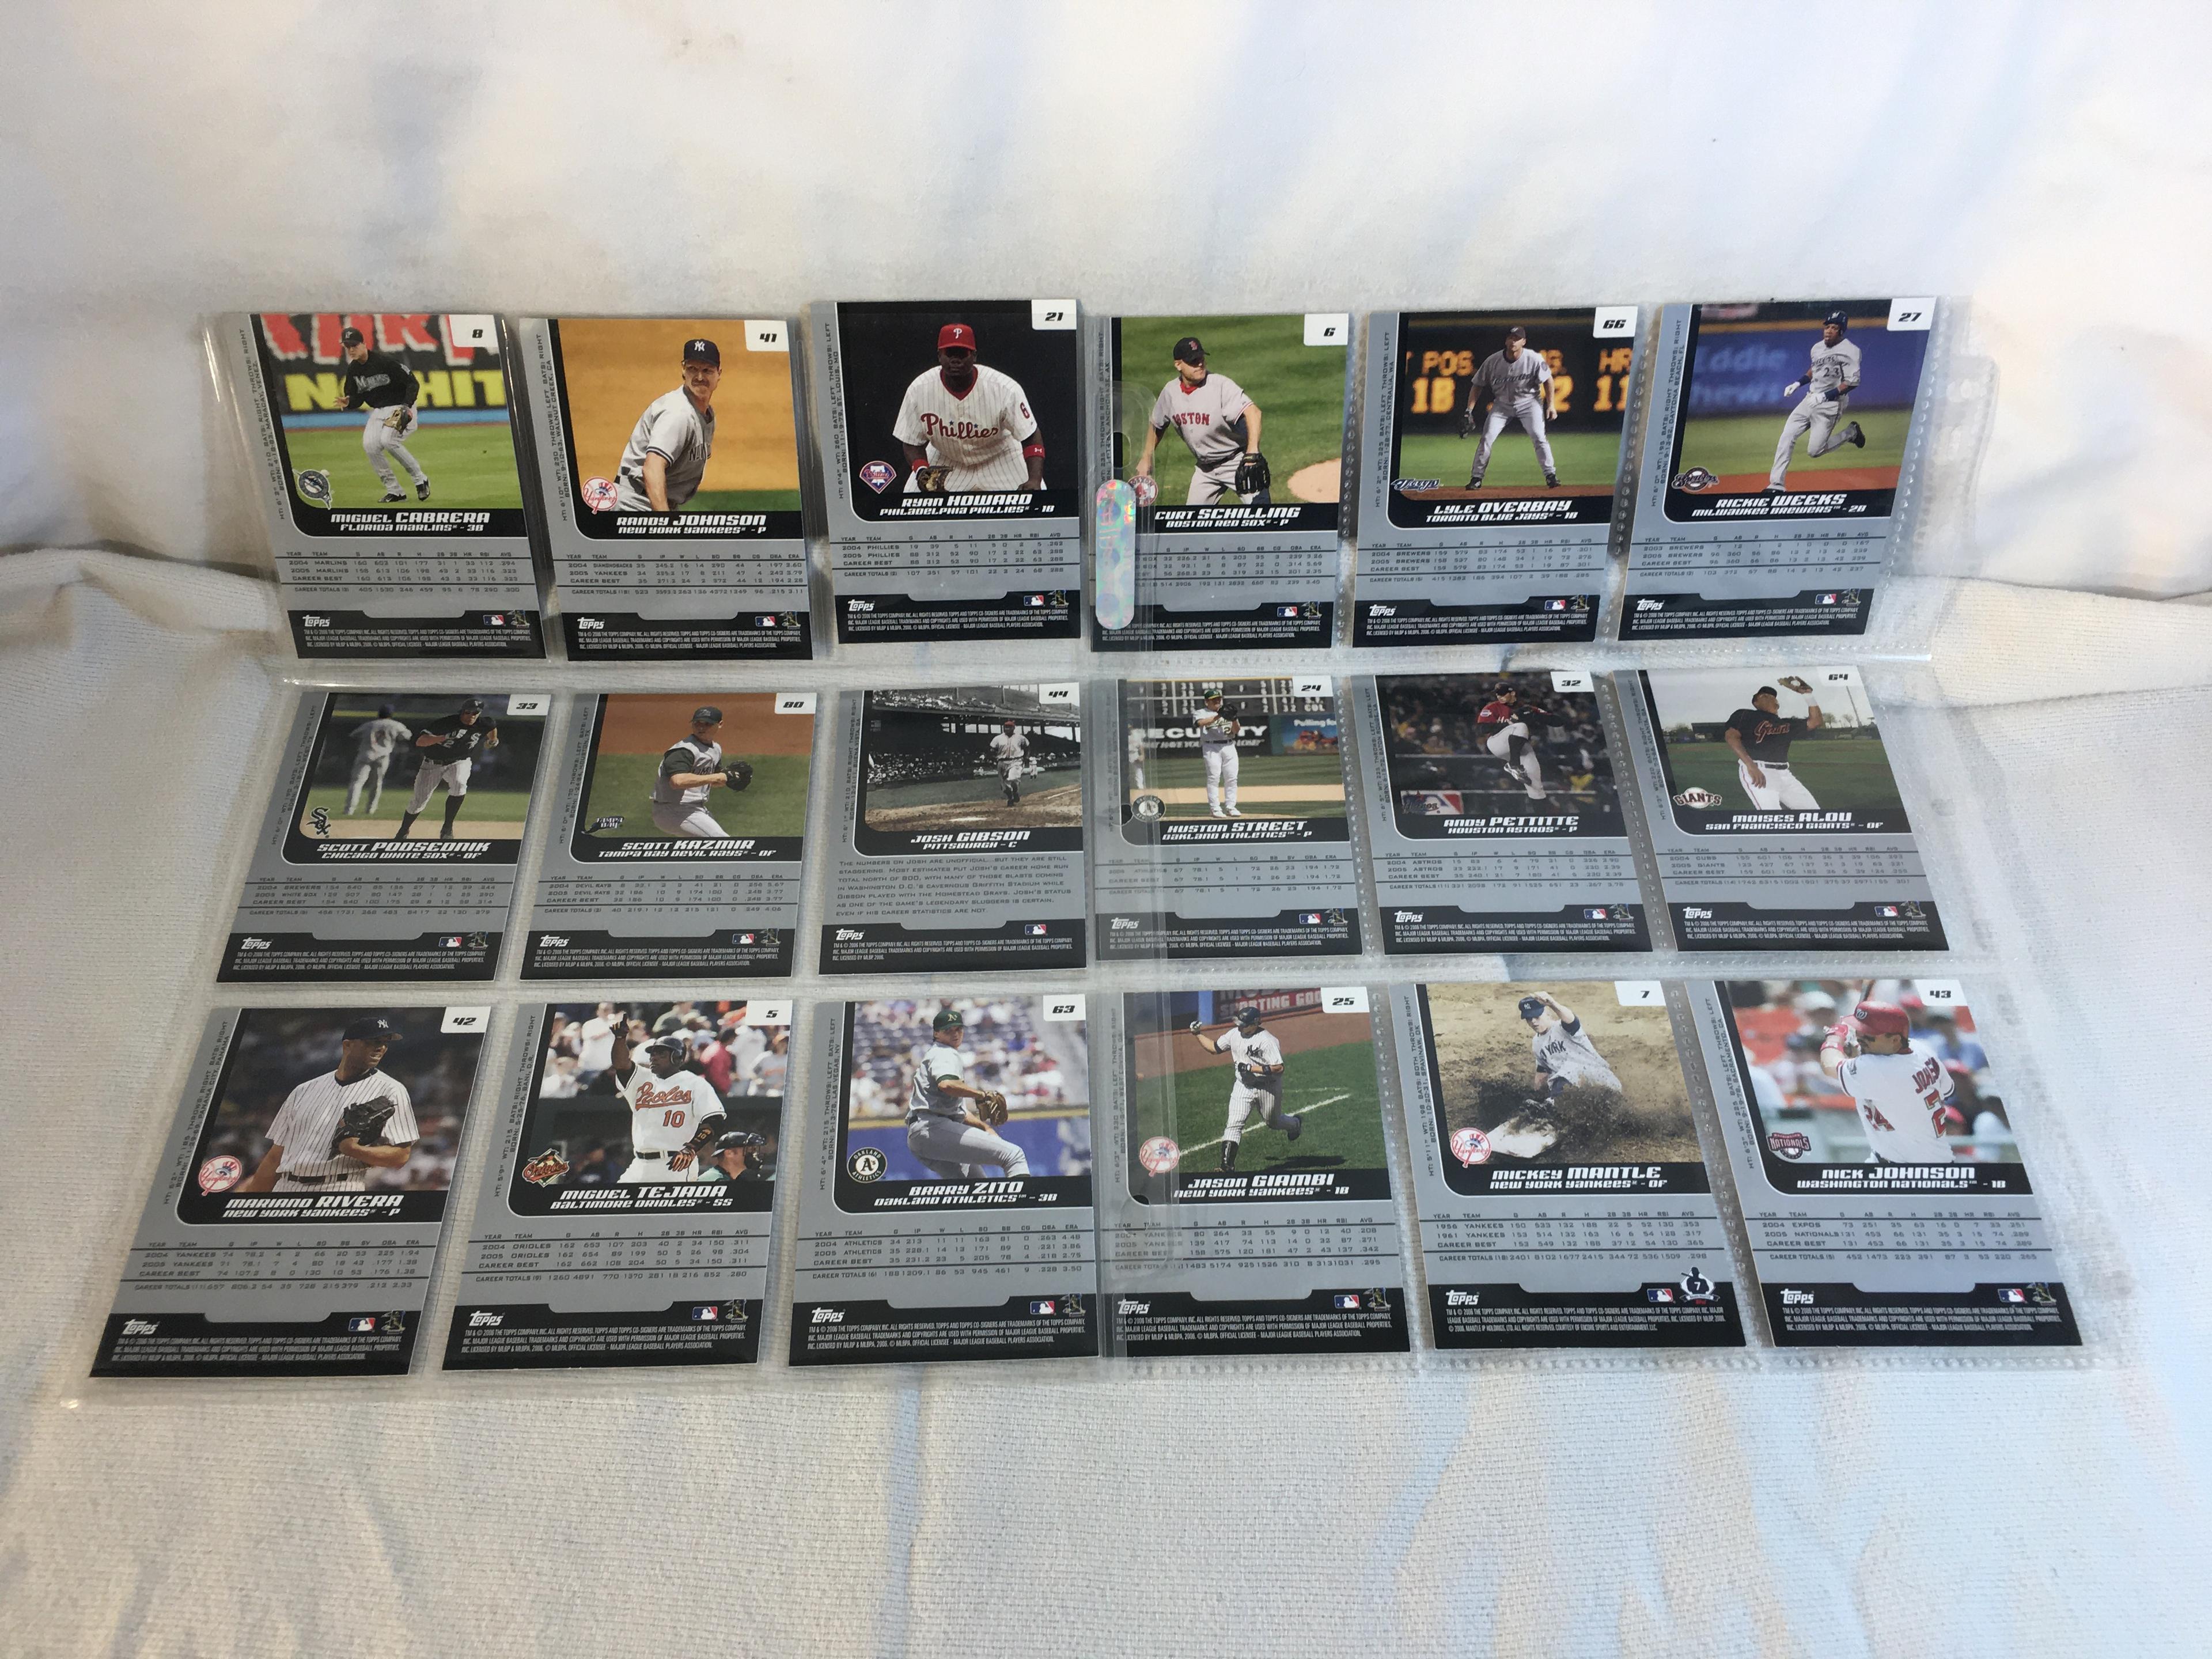 Lot of 18 Pcs Collector Modern MLB Baseball Sport Trading Assorted Cards and Players - See Photos